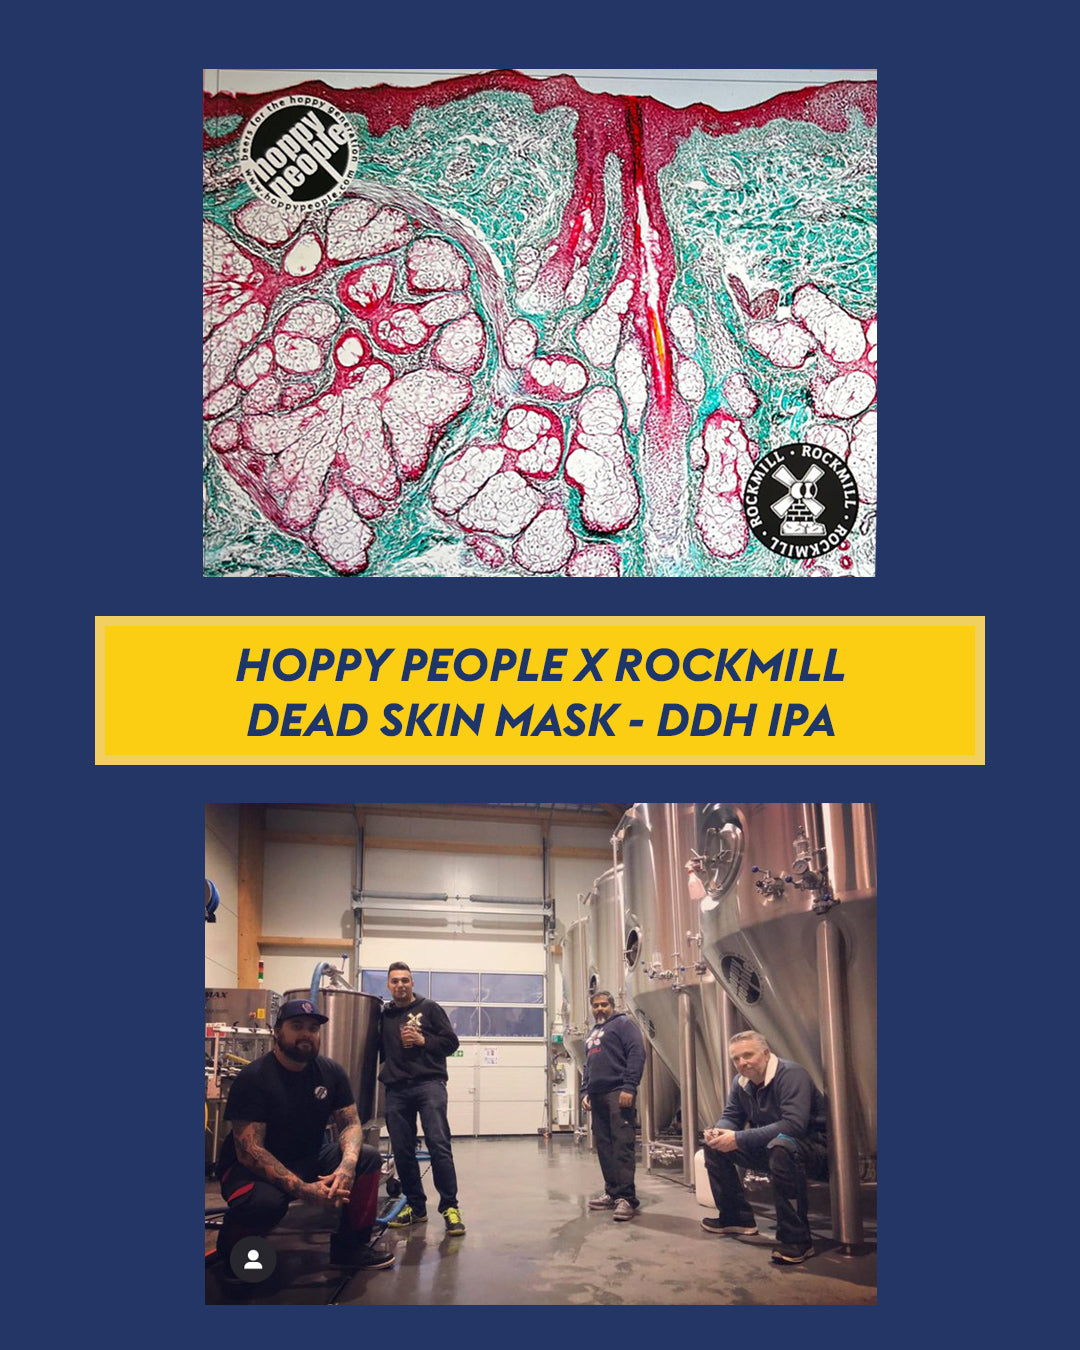 BREWERY OF THE MOMENT: HOPPY PEOPLE - DDH COLLAB TRIO!